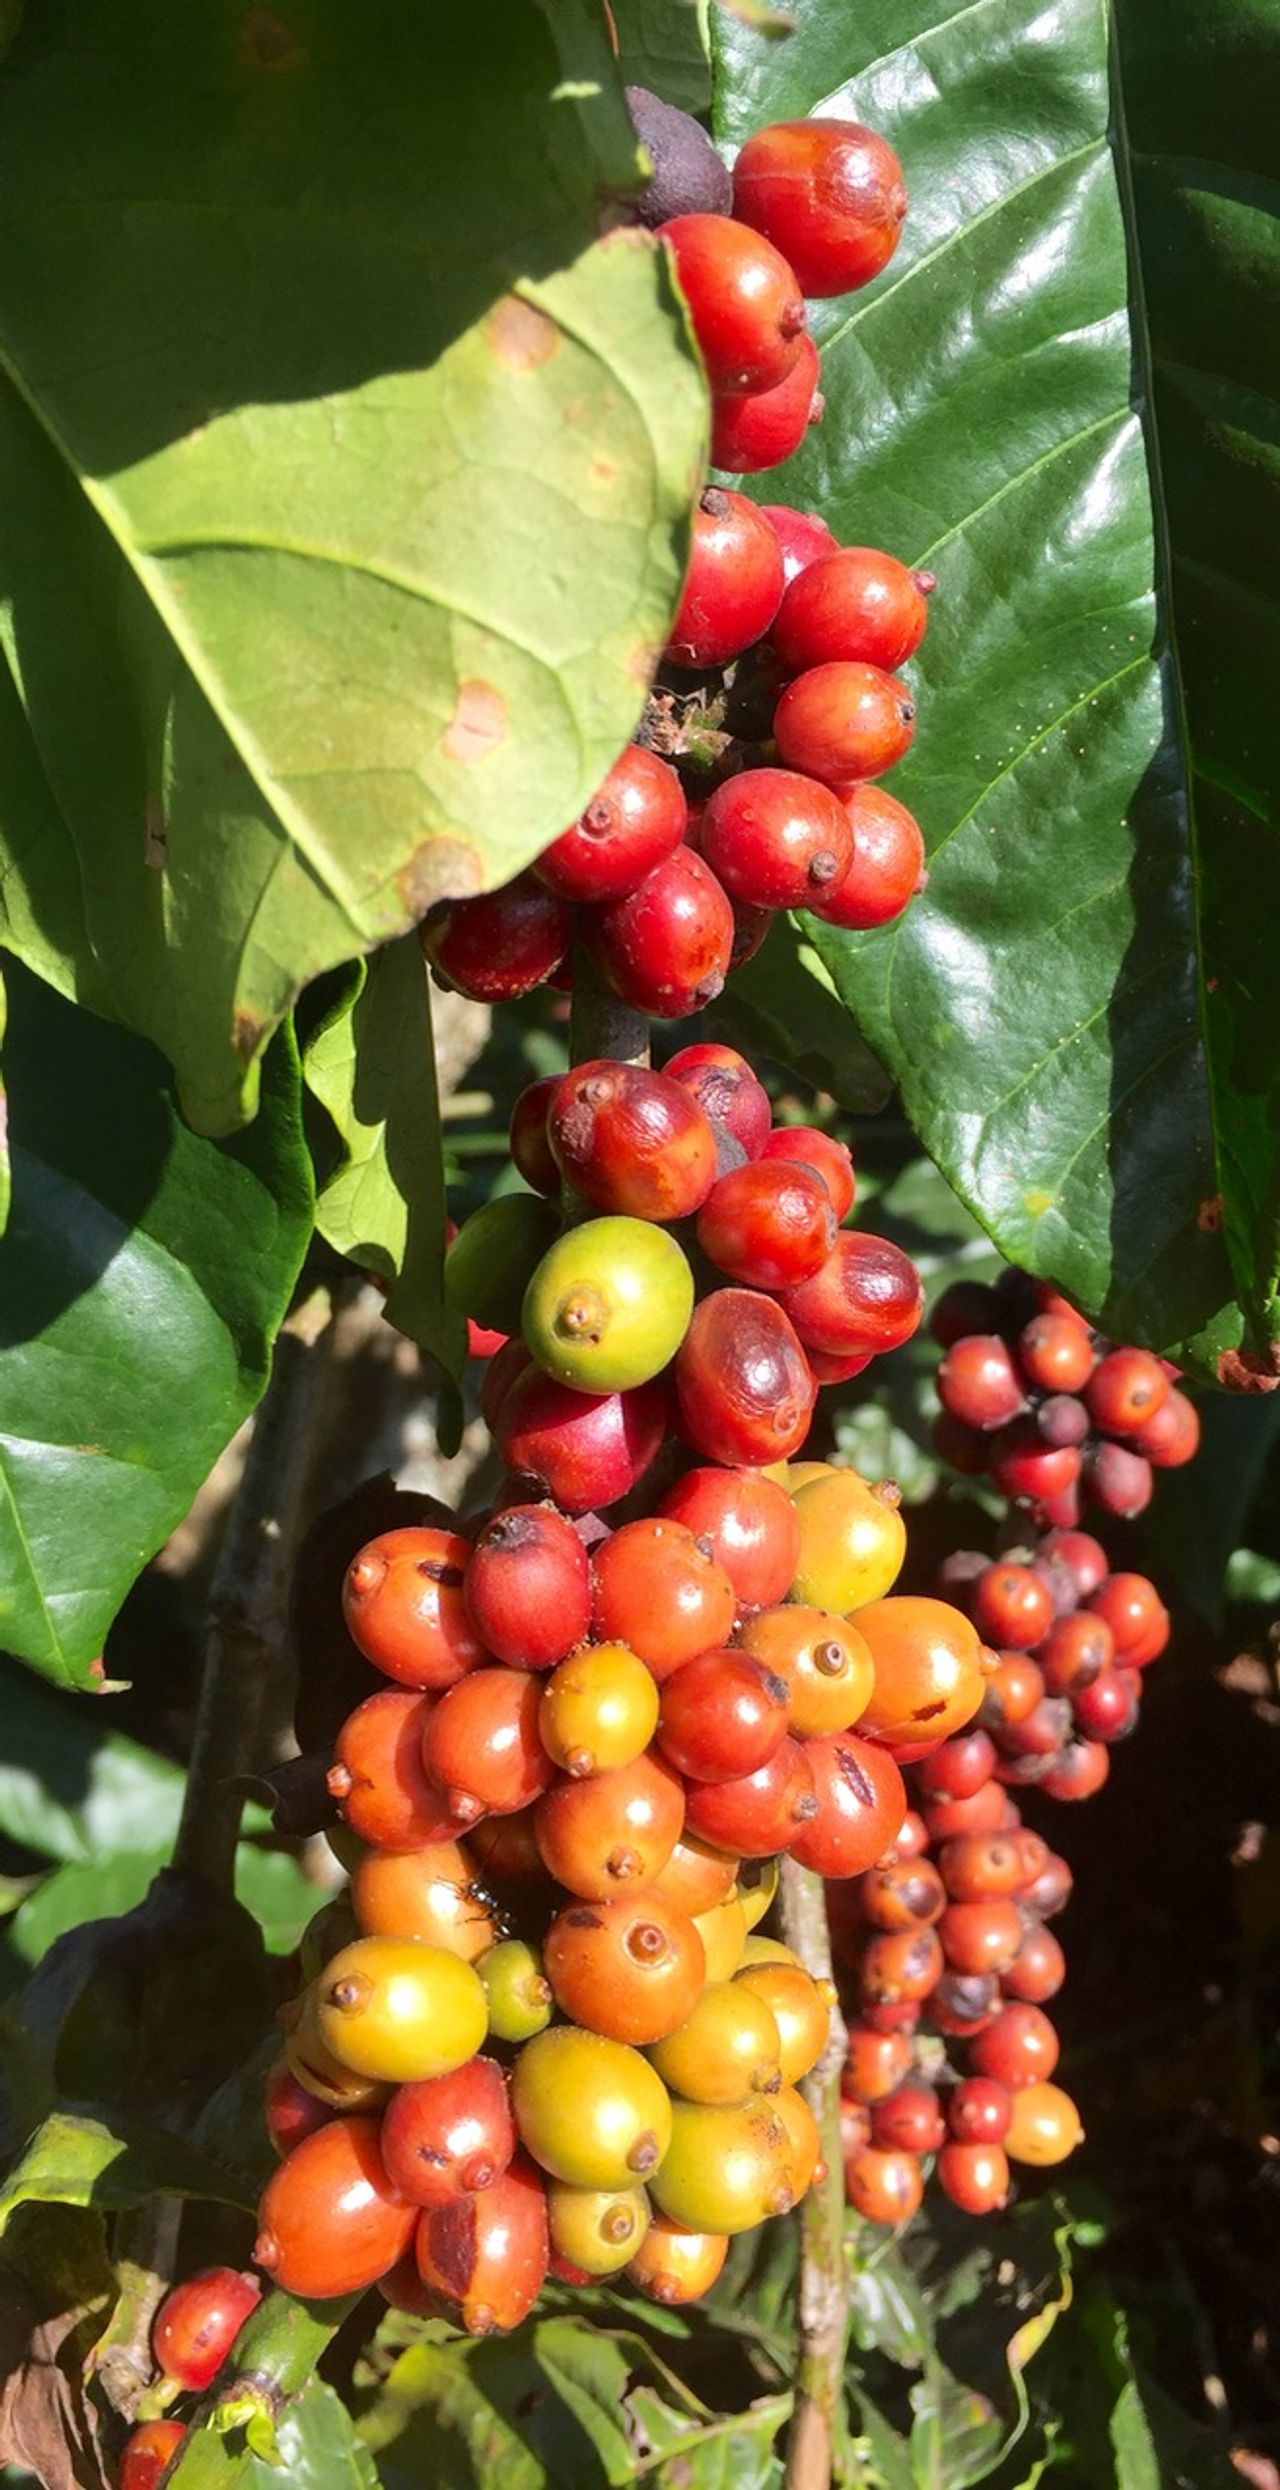 Coffee beans ready for harvest.